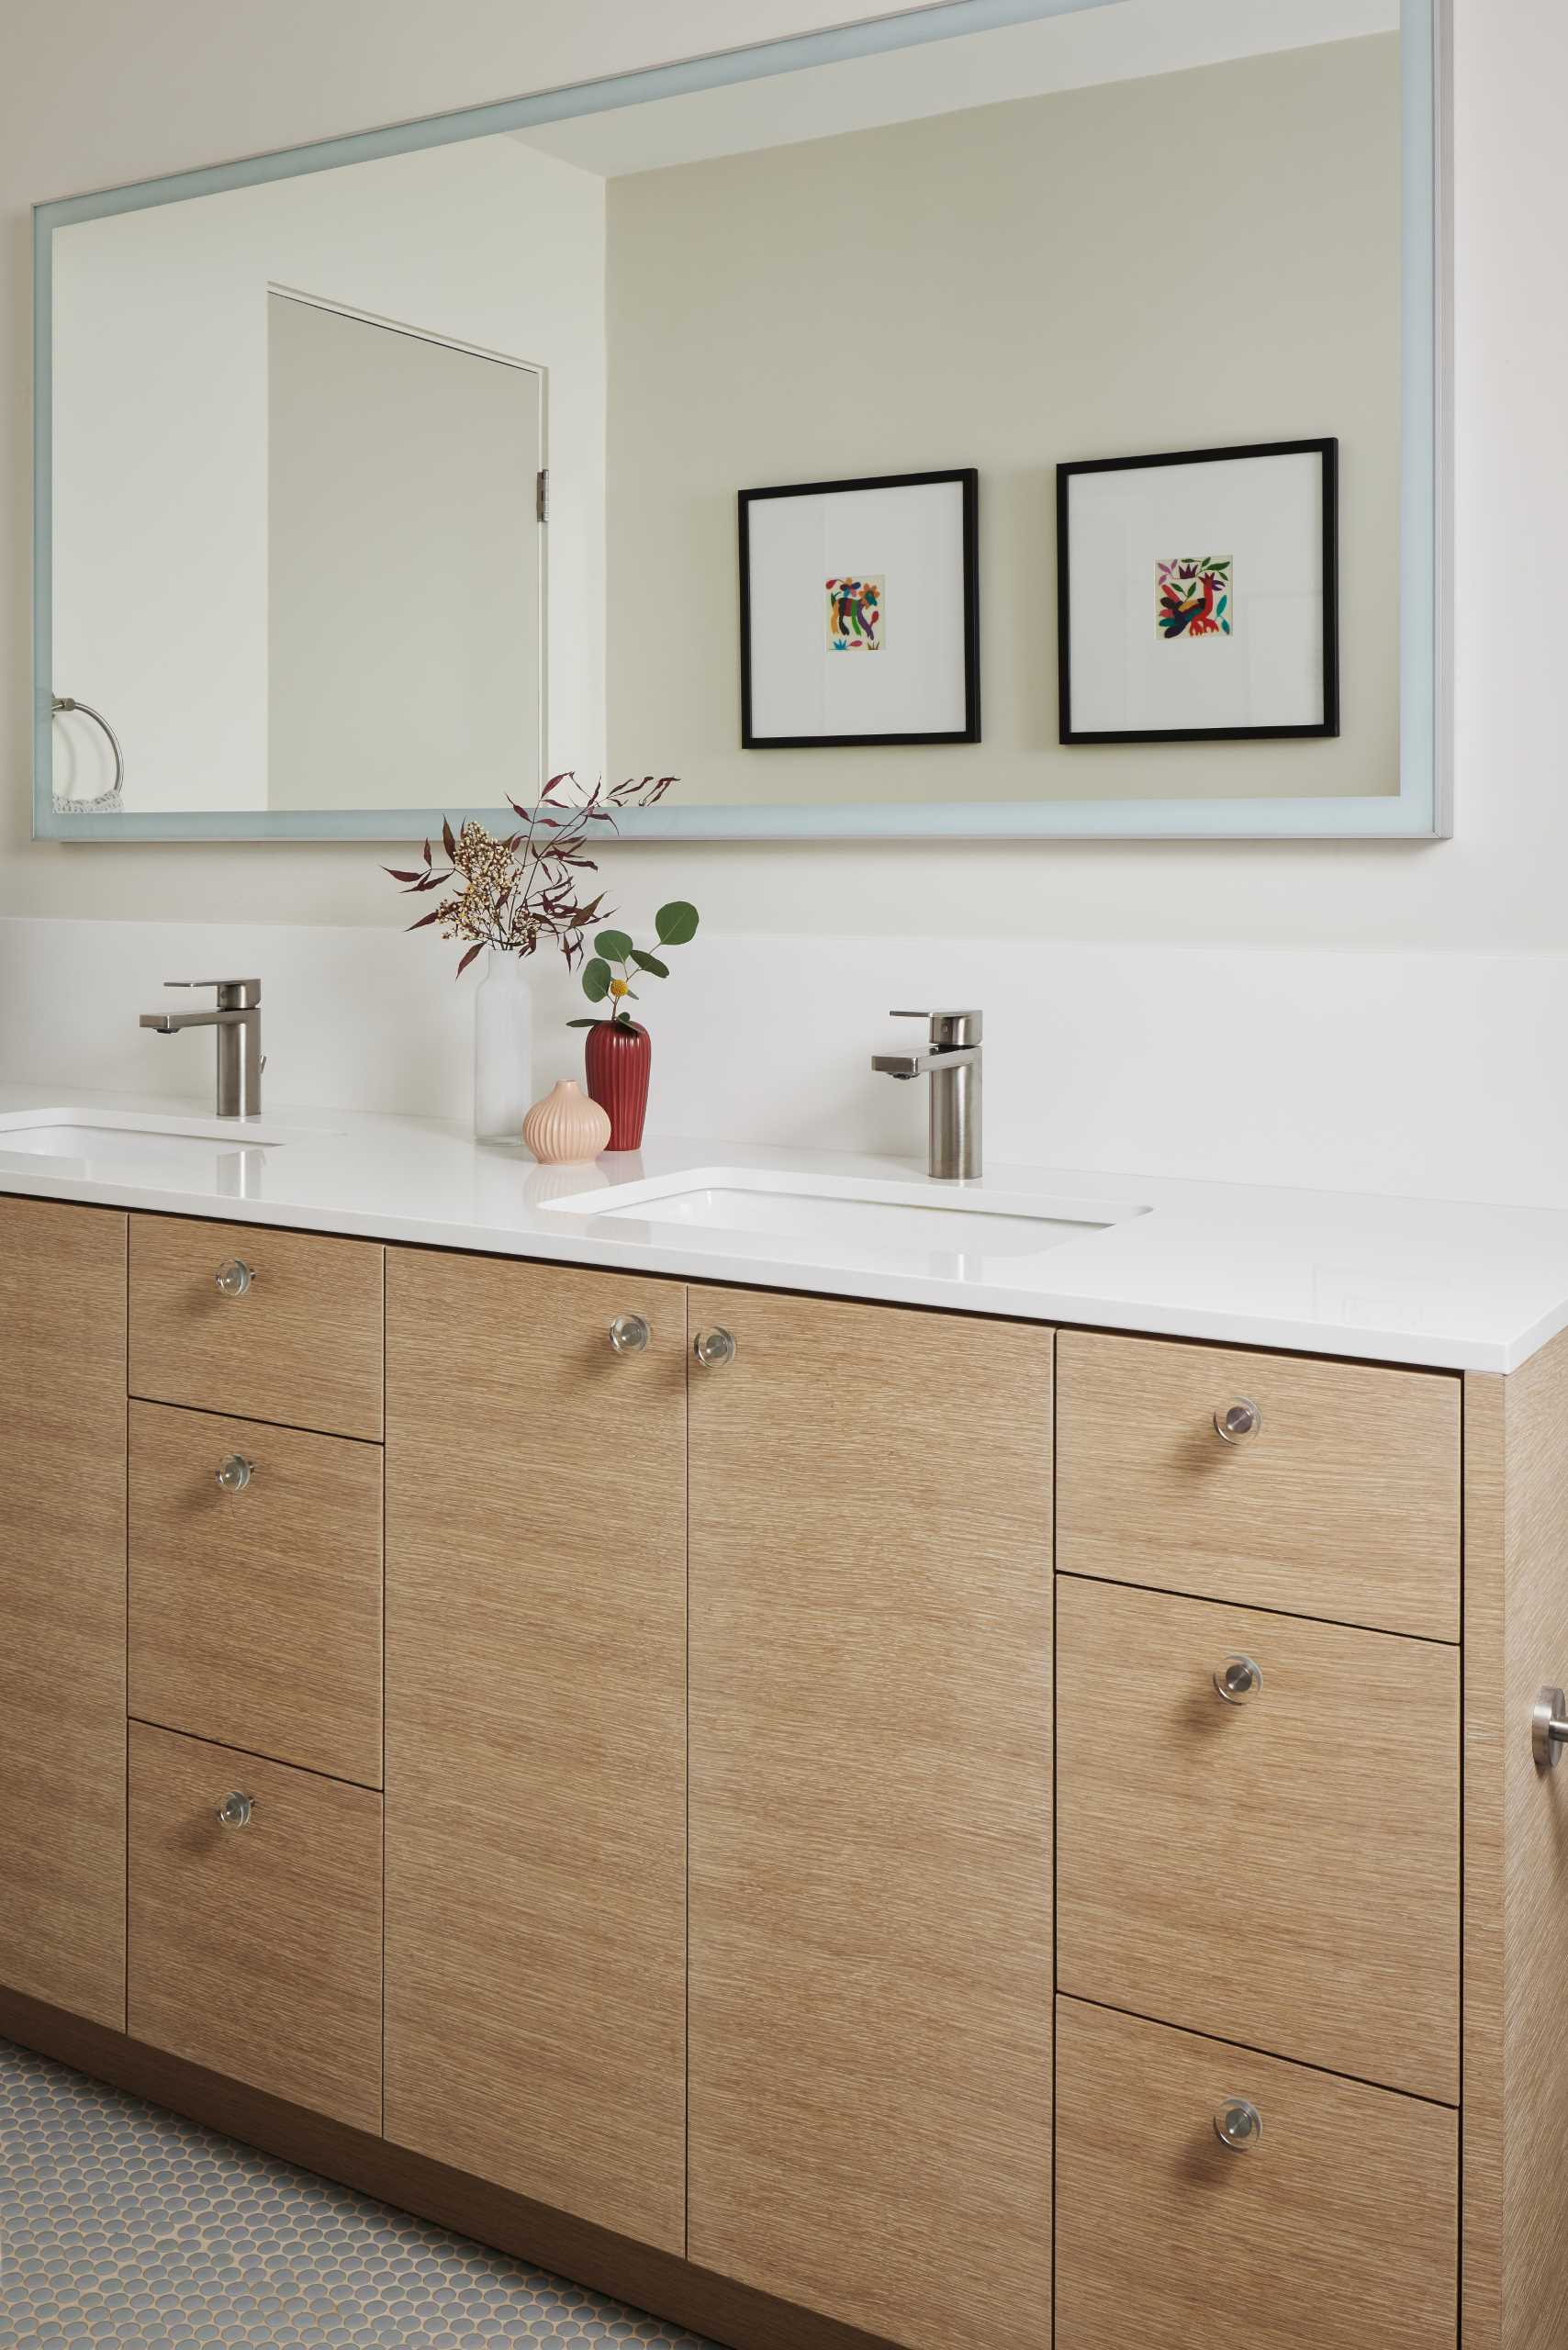 The updated bathroom is bright and open and now includes a double vanity with undermount sinks, a long horizontal mirror, and tile that wraps from the end of the vanity and around the wall to the shower.